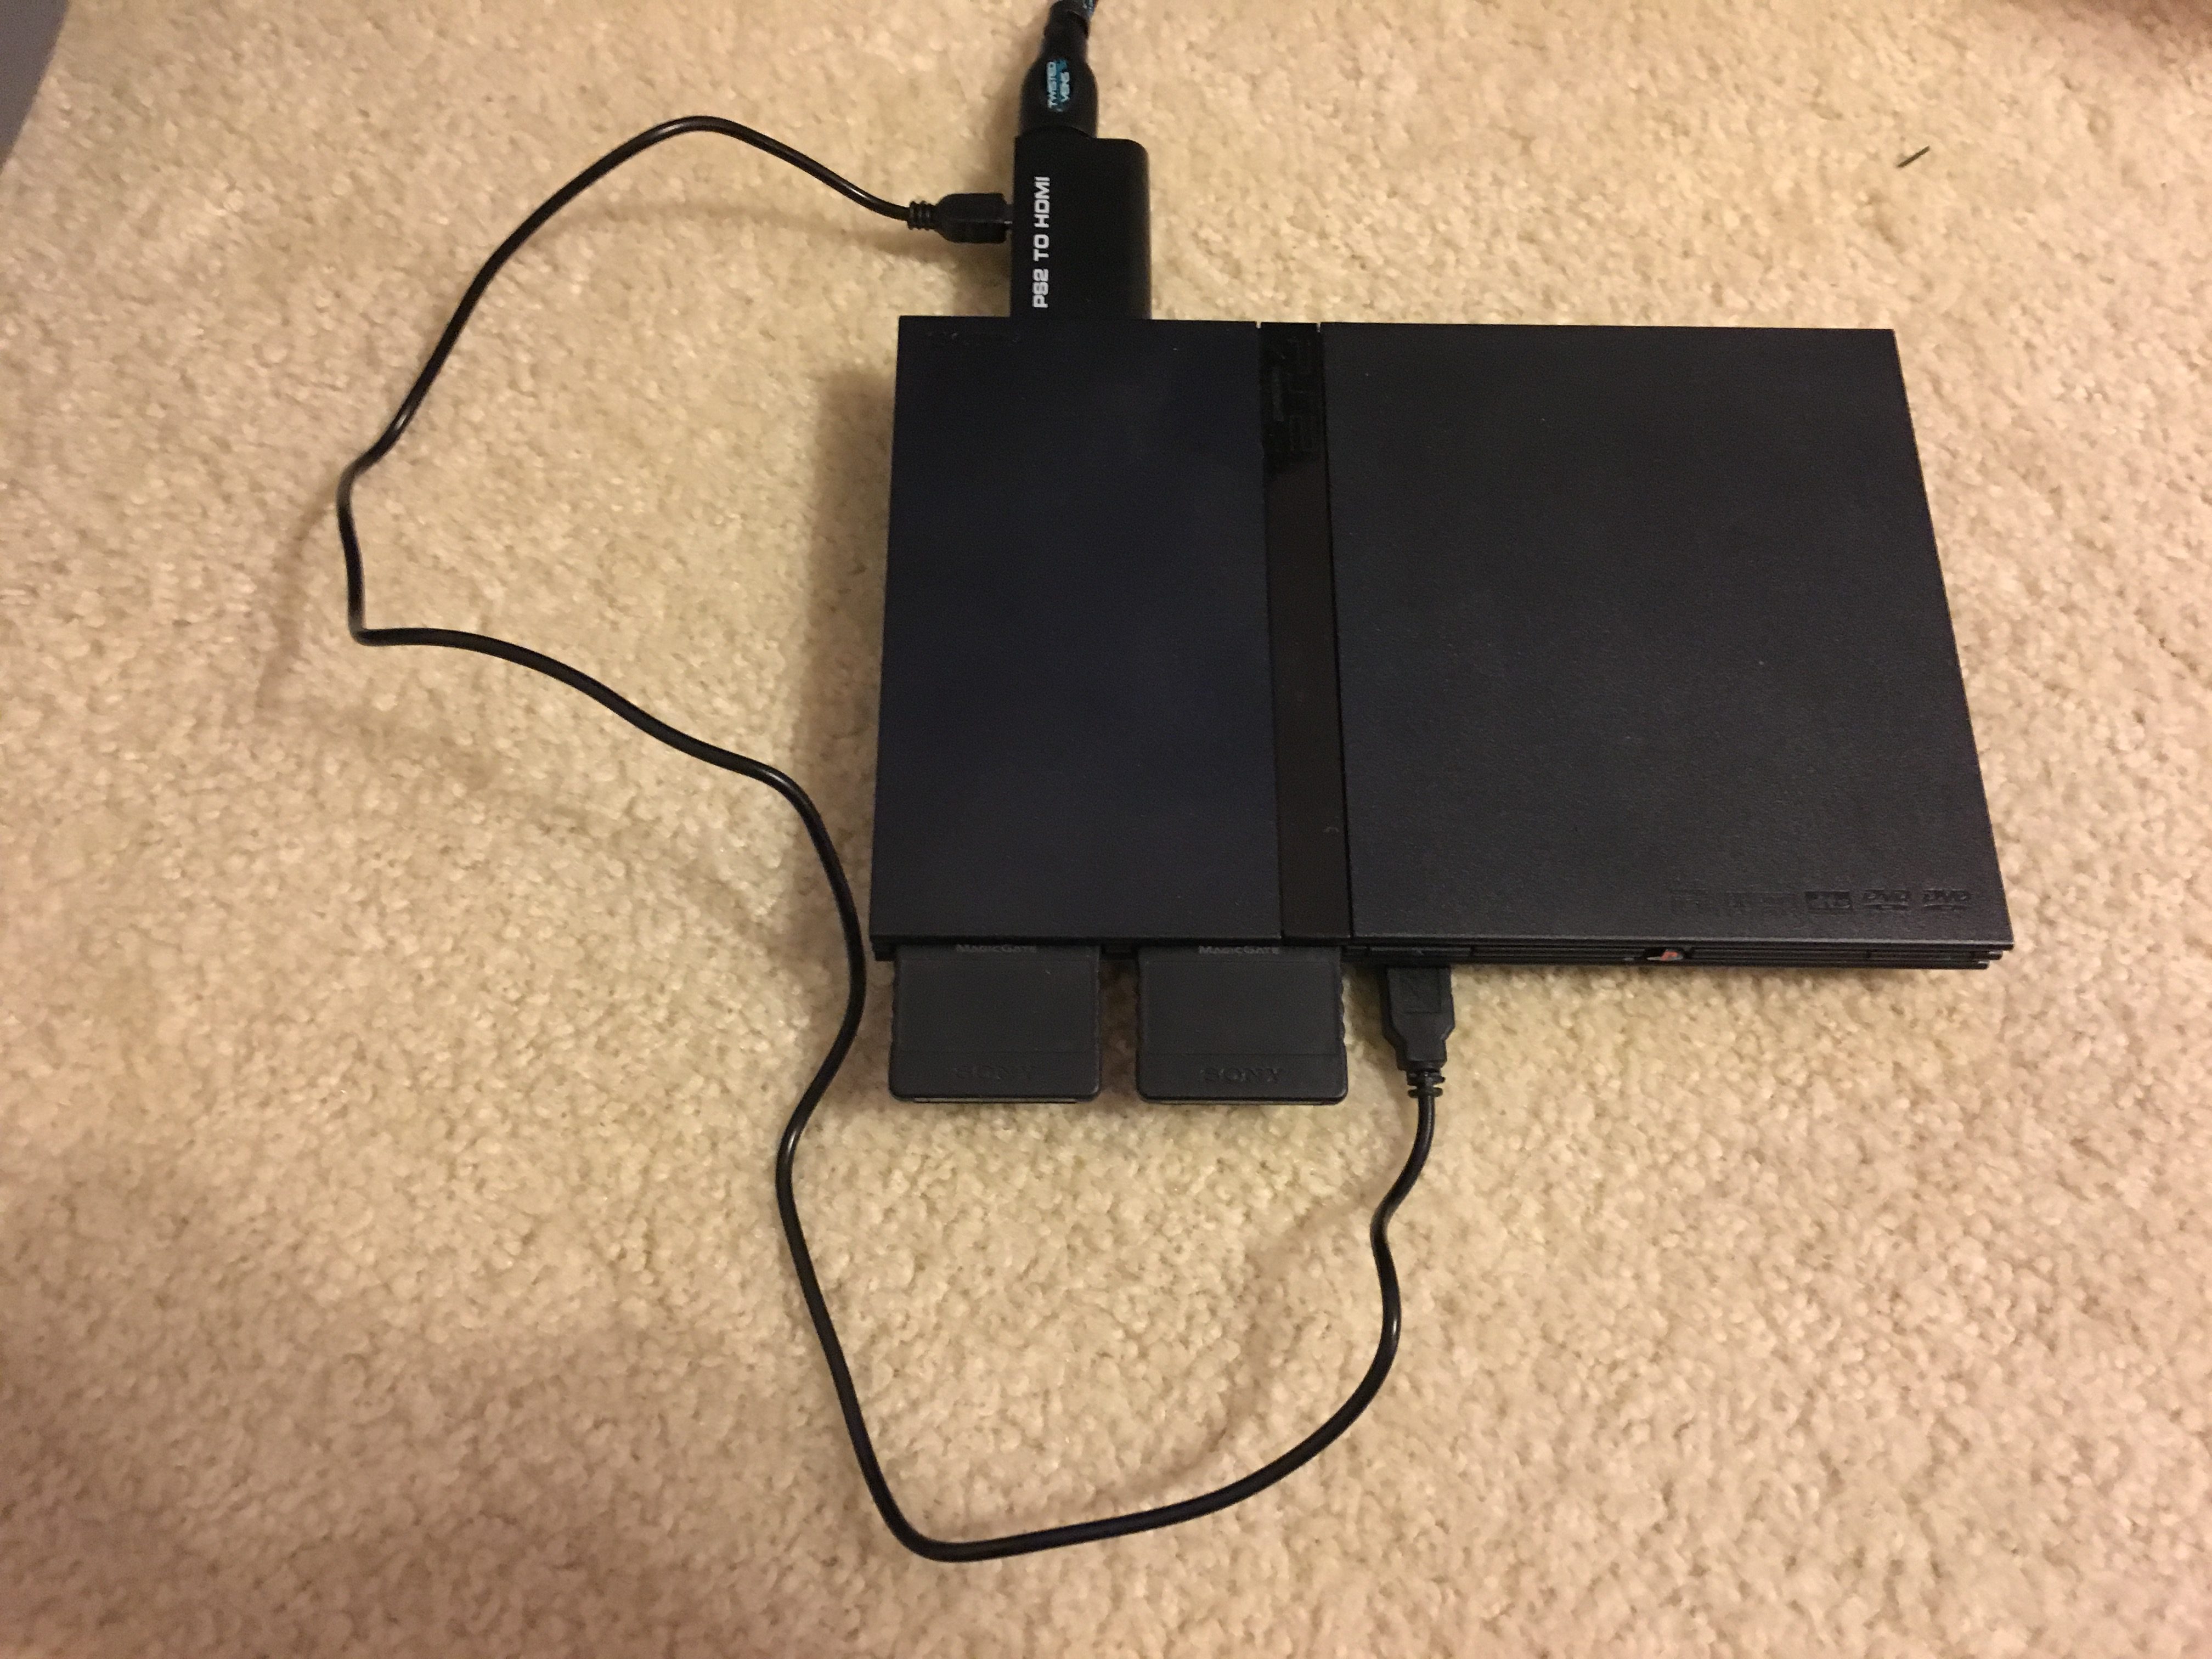 connecting ps1 to new tv